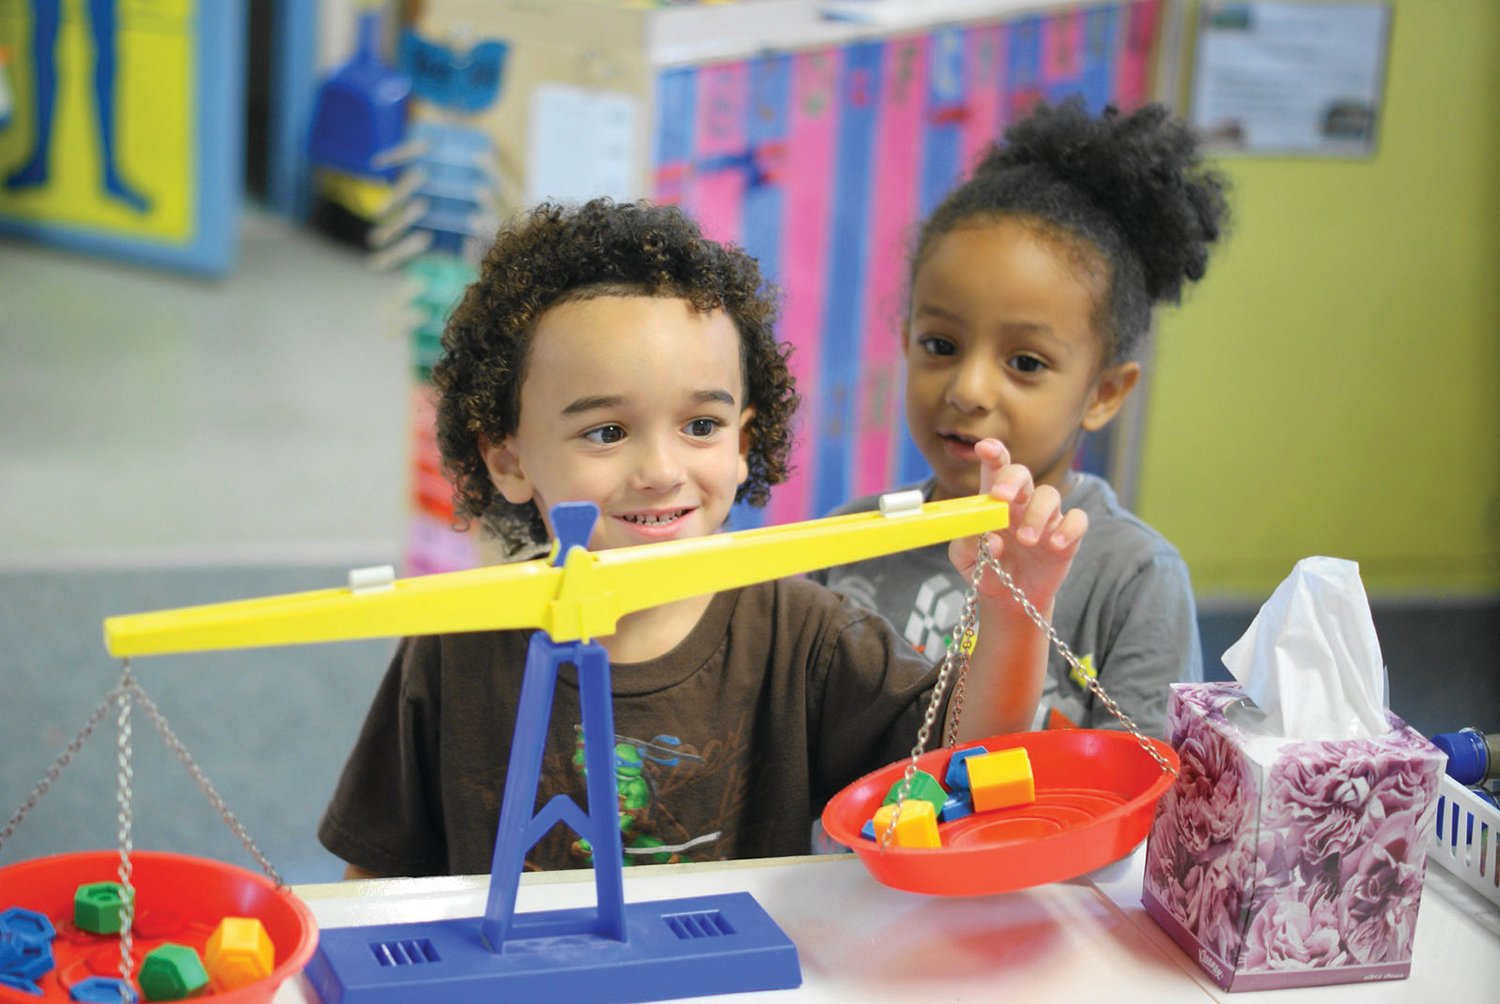 Child Care of Southwest Florida accepts children ages six weeks through 8 years old, including students enrolled in Florida’s Voluntary Prekindergarten Education Program.